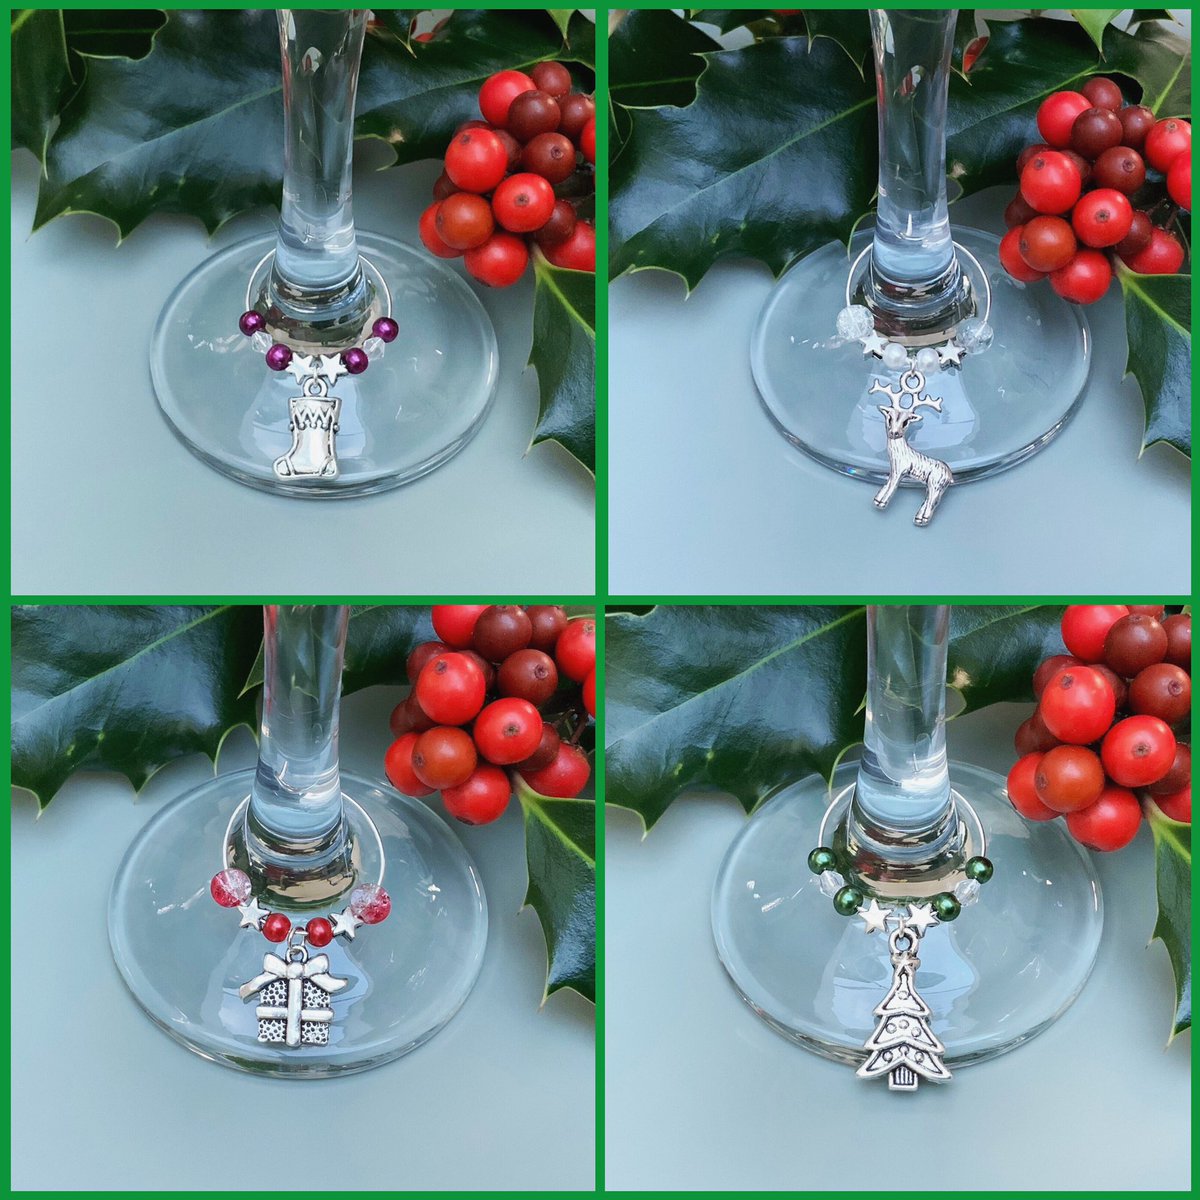 Christmas has landed! ⭐️⭐️
Lilchigcharms.Etsy.com

#christmas #giftsforher #giftsforhim #winelovers #wineglasscharms #stockingfillers